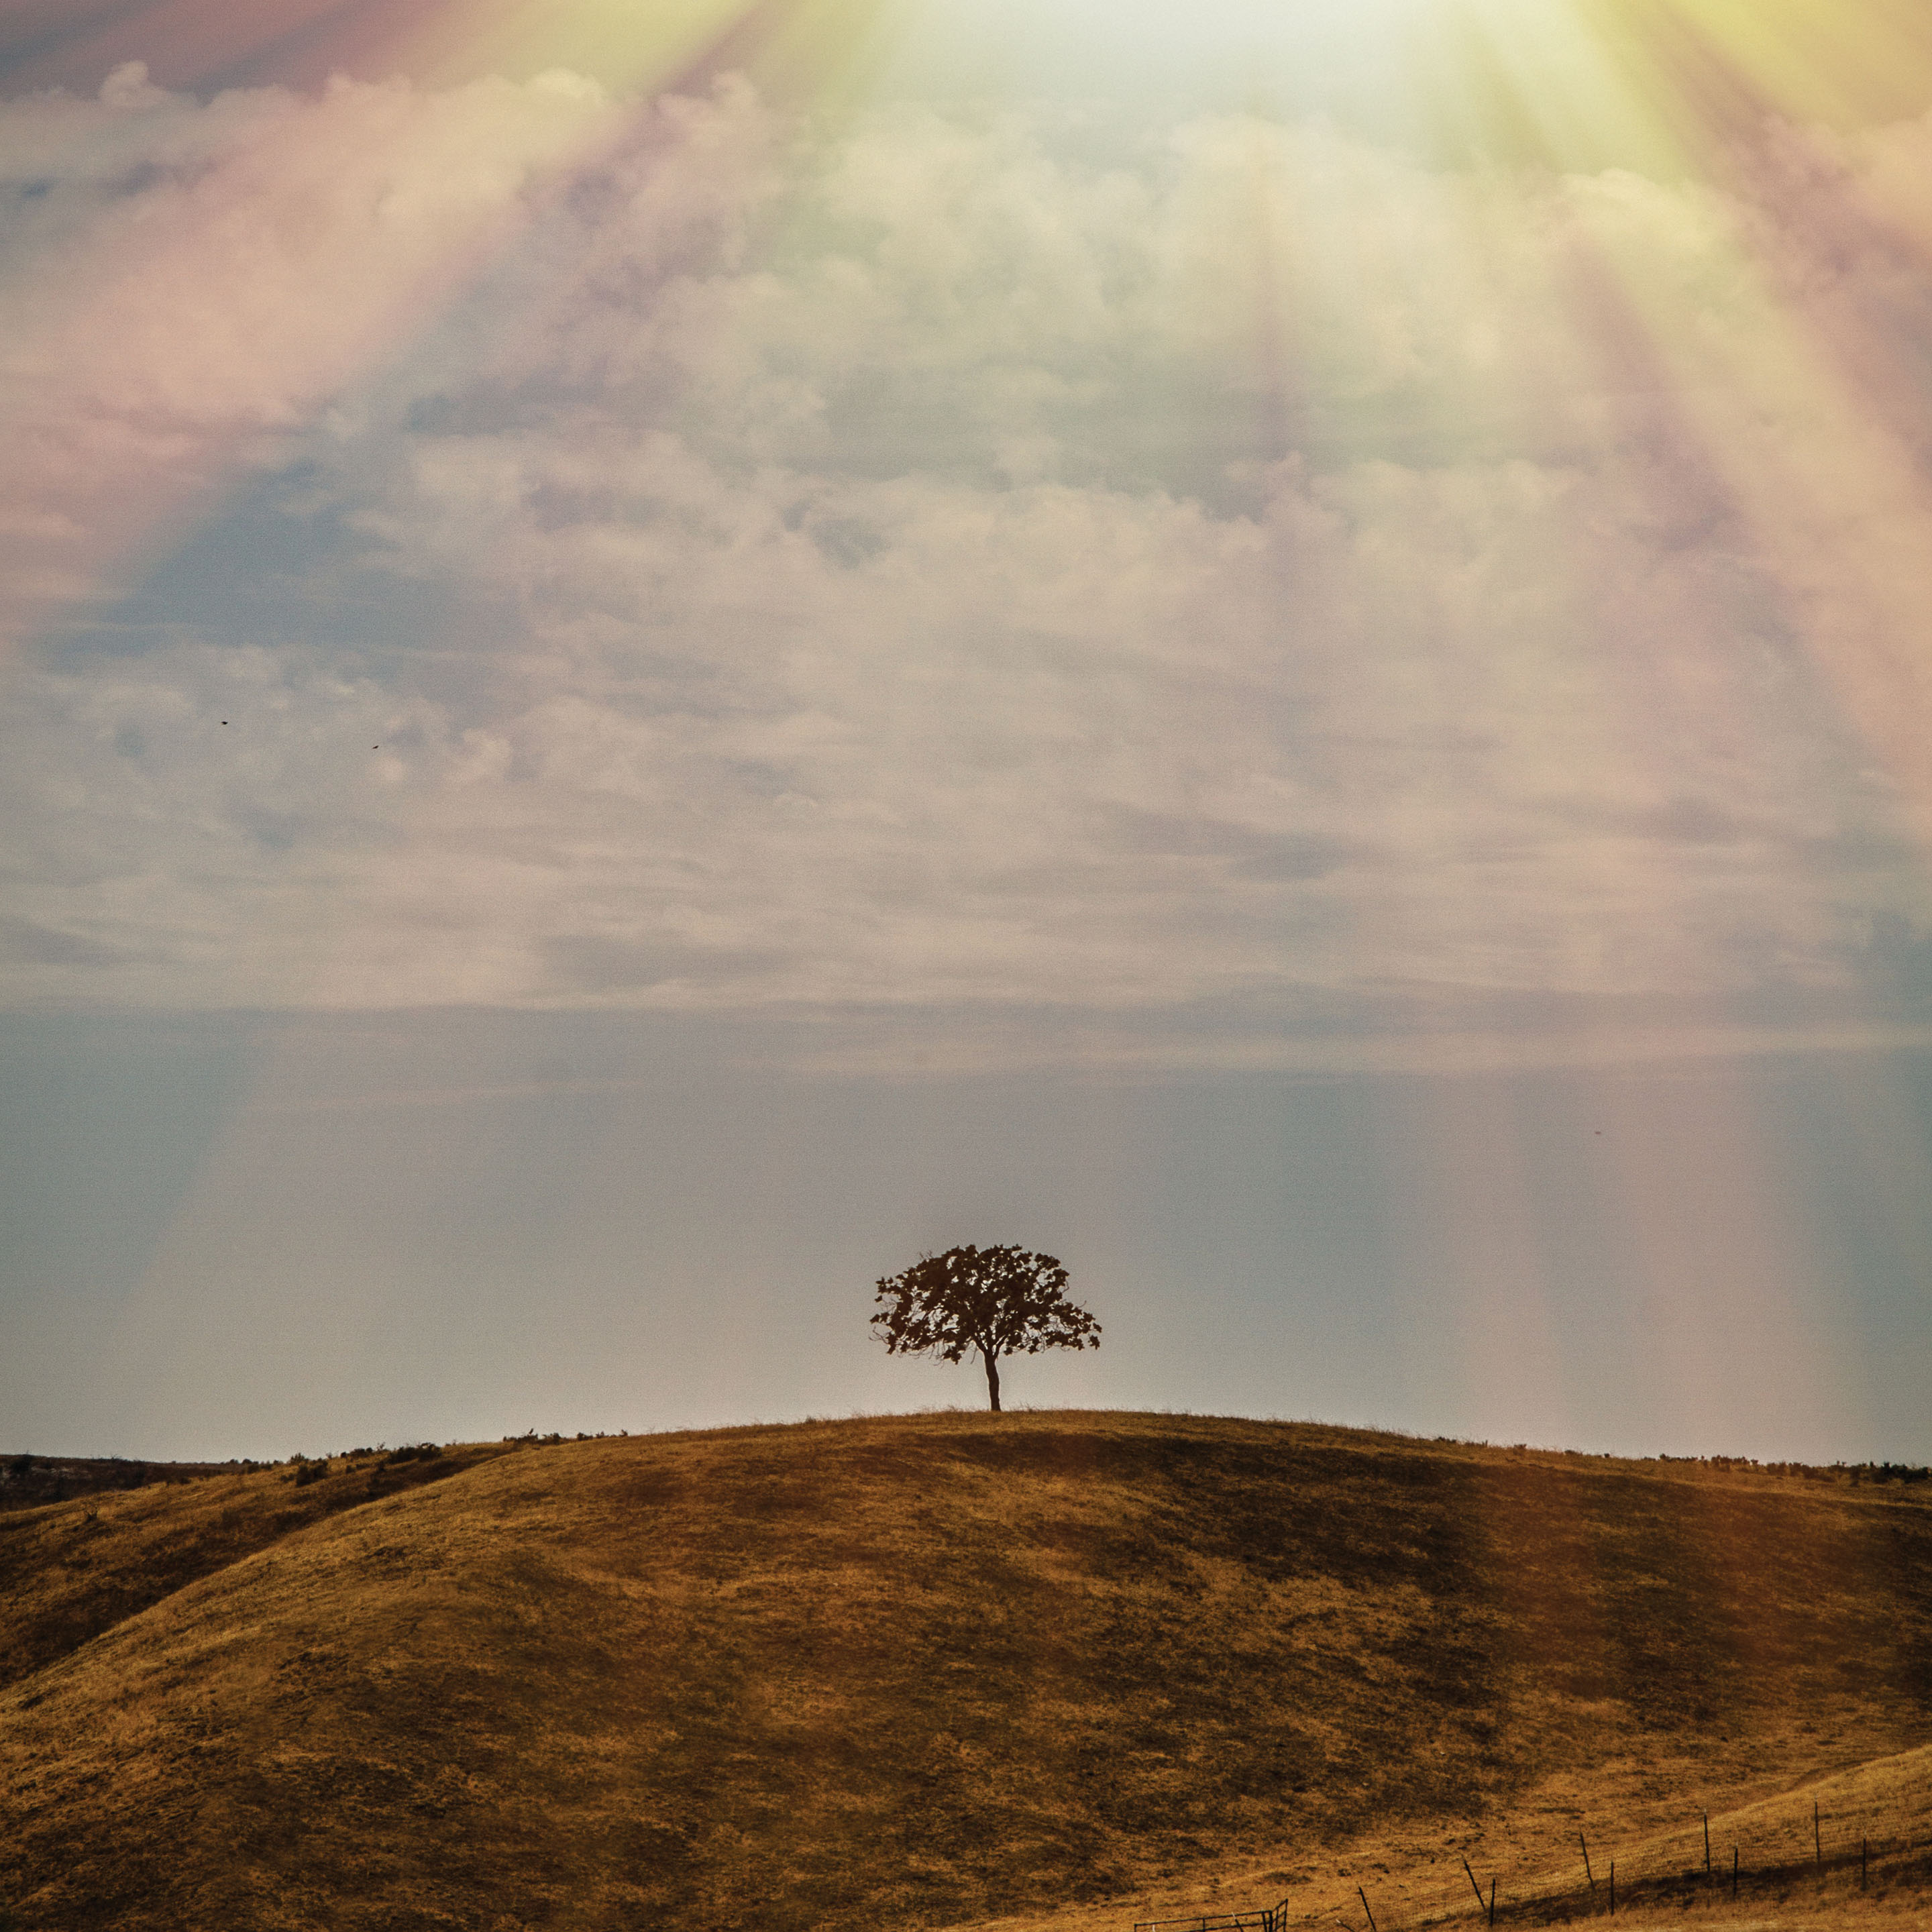 Fine art photography commission tiny tree perched on rolling hills beneath blue sky with white clouds and rays of sunshine